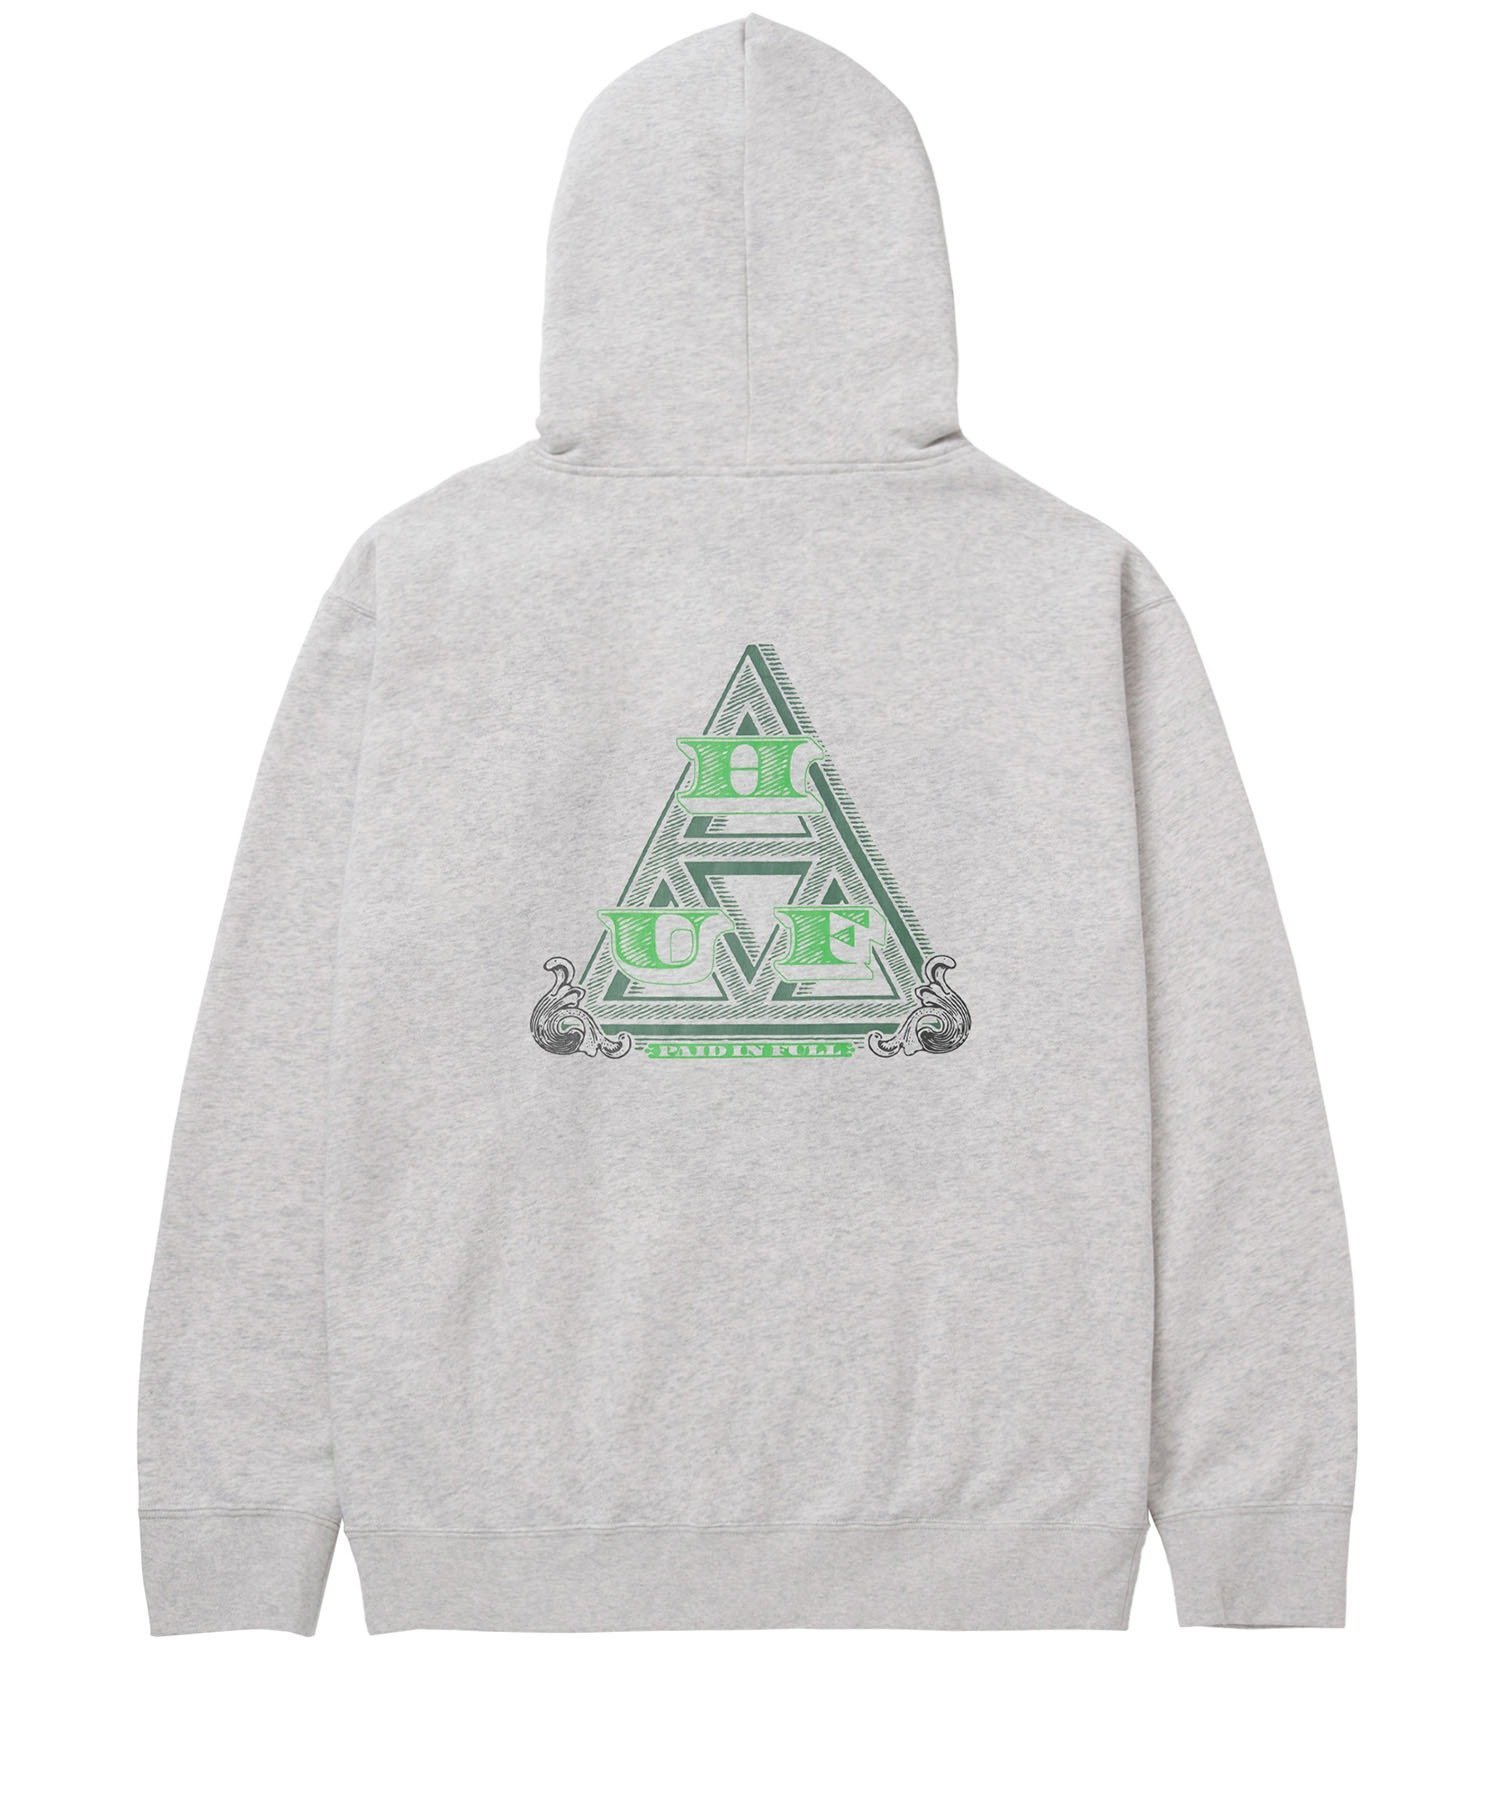 PAID IN FULL P/O HOODIE HUF ハフ フード パーカー